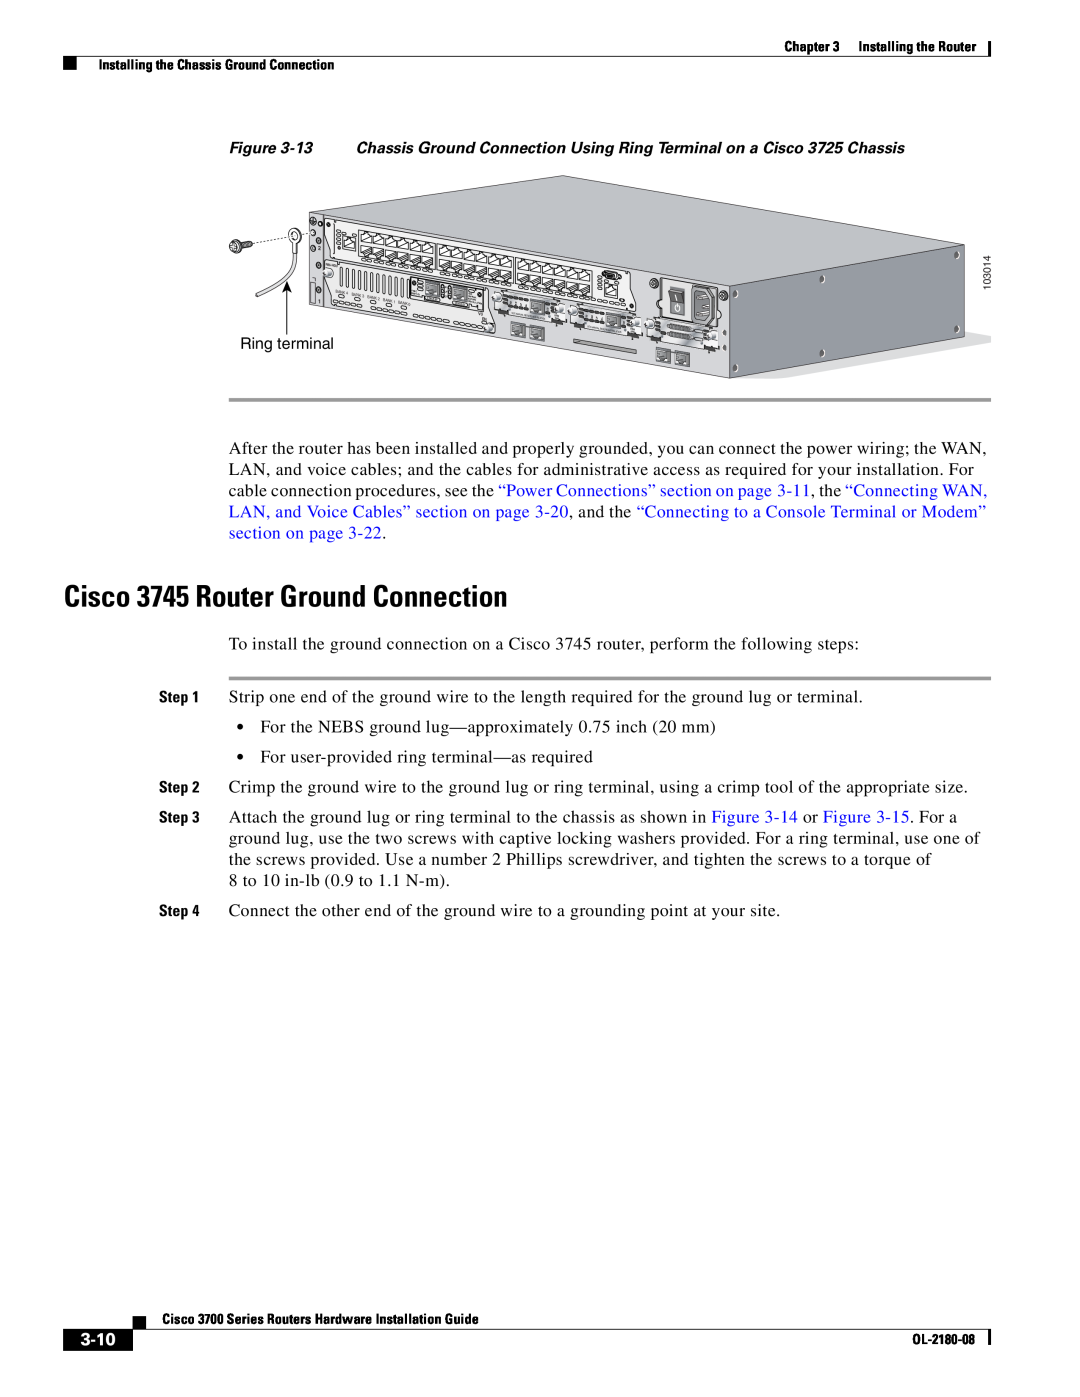 Cisco Systems 3700 Series manual Cisco 3745 Router Ground Connection, 3-10, Ring terminal 